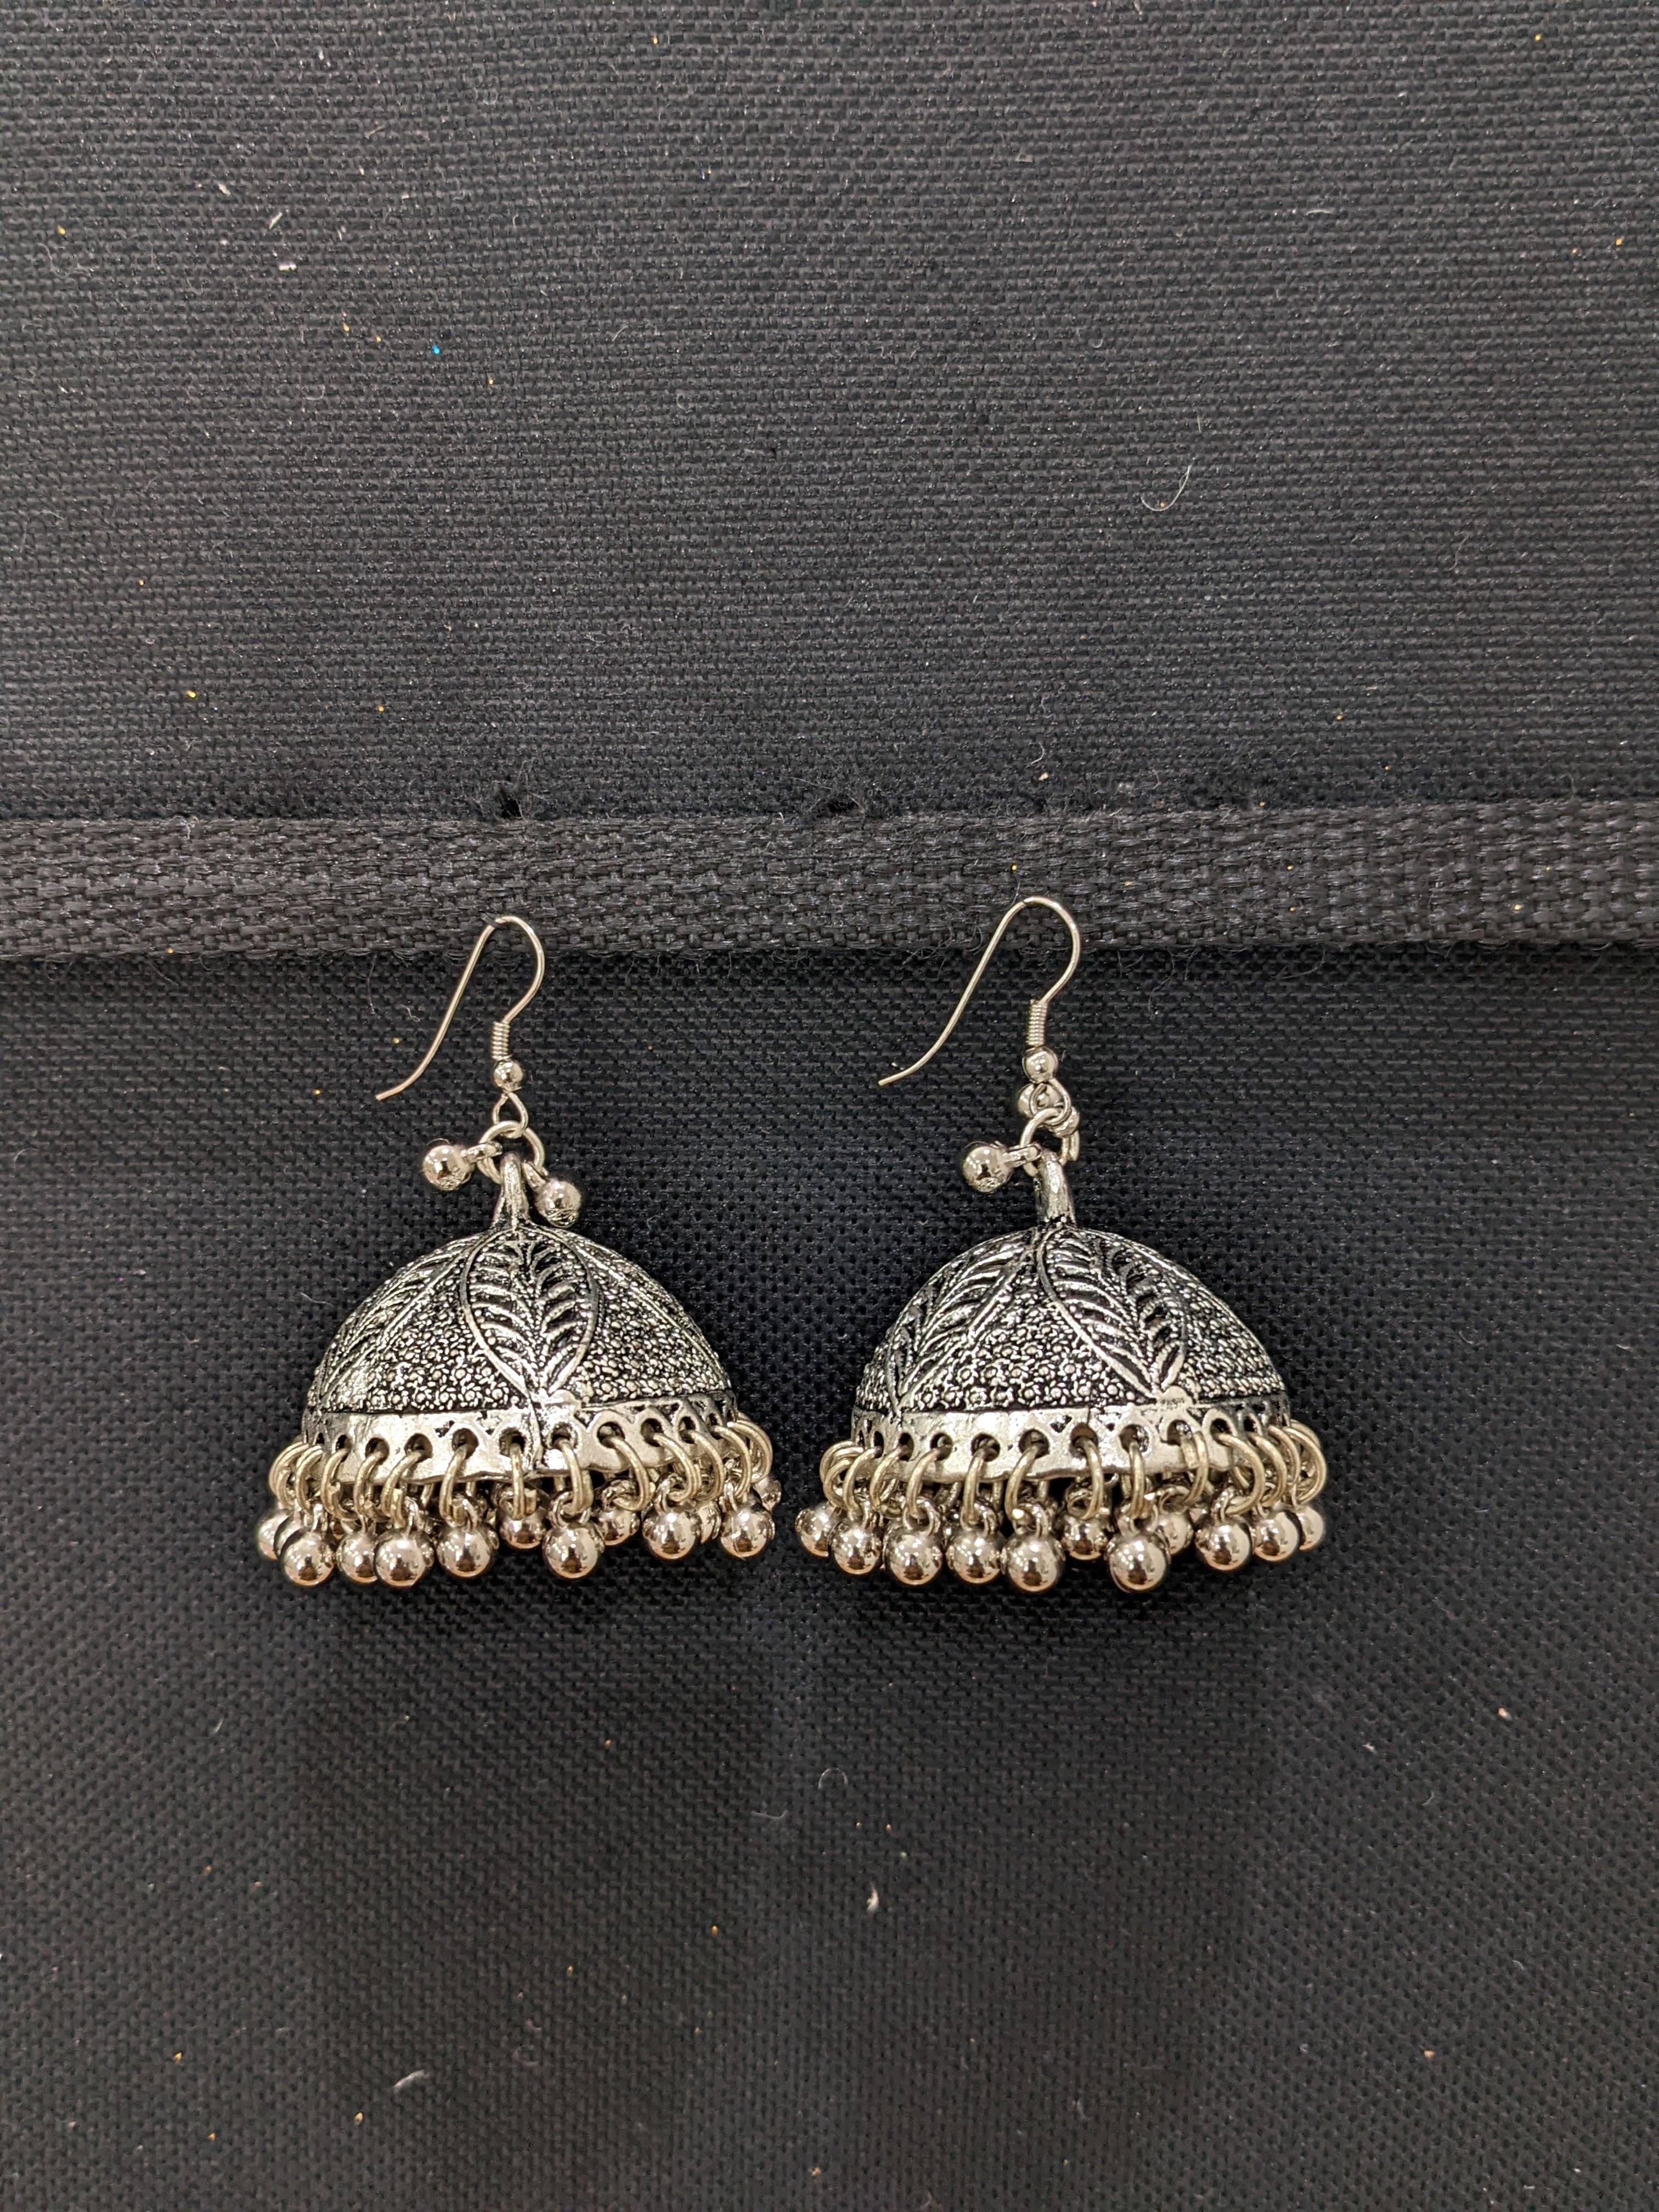 Vintage Silver Color Hollow Earrings for Women Ethnic Indian Jewelry Boho  Bollywood Oxidized Big Bell Tassel Dangle Jhumka